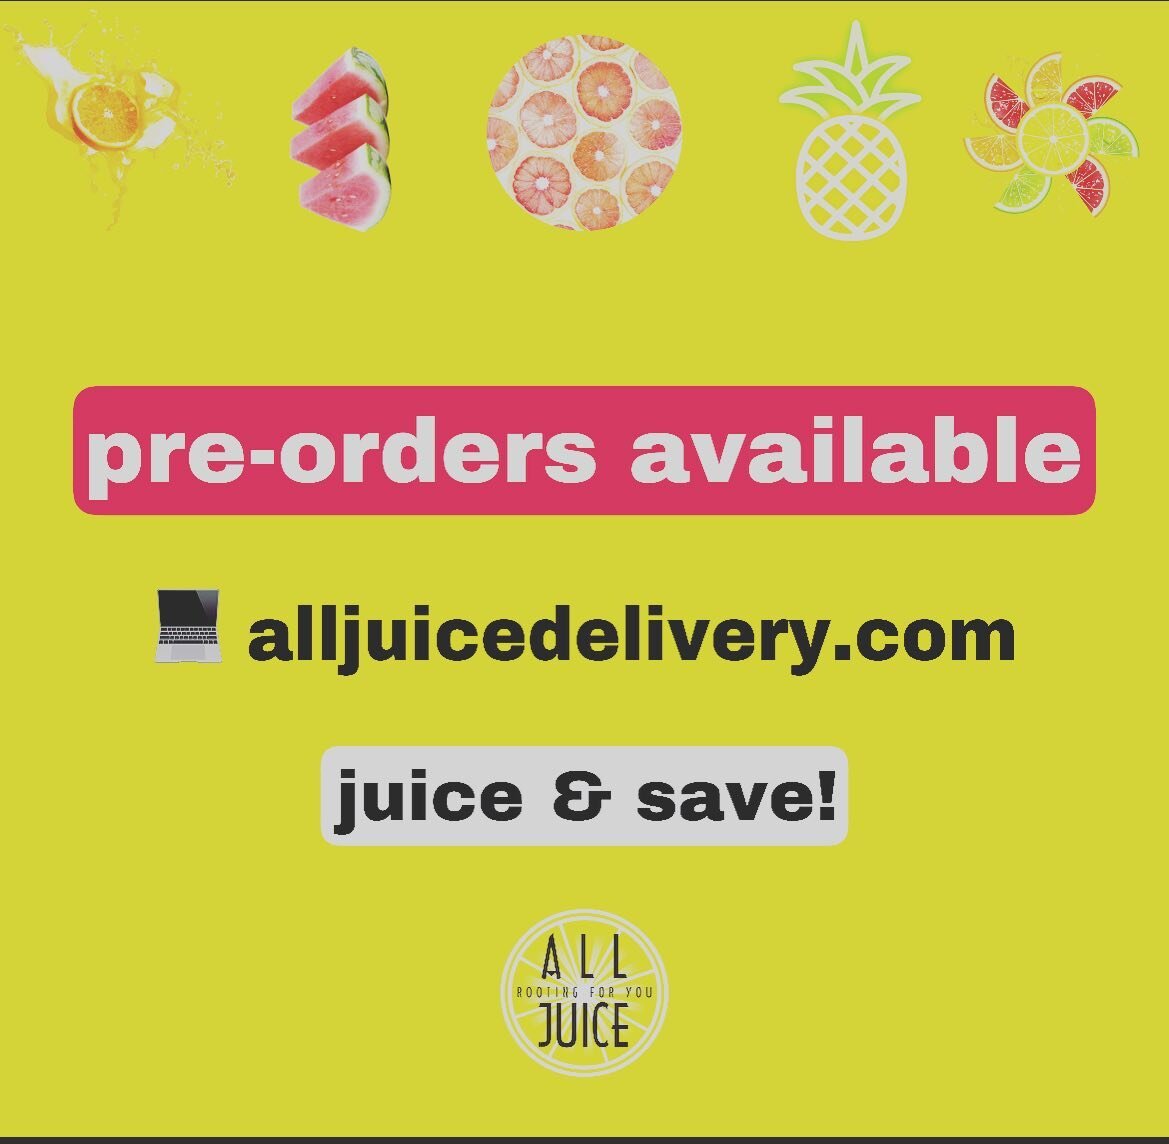 #preorder for ALL your juicing needs! 🥒🍎 need a dose of energy? Our juices are packed with 3lbs of #raw #fresh fruits &amp; veggies 🥕 Pre-order at alljuicedelivery.com or 📲 text (419)705-9619 to order! We&rsquo;re #RootingForYou! 🤍